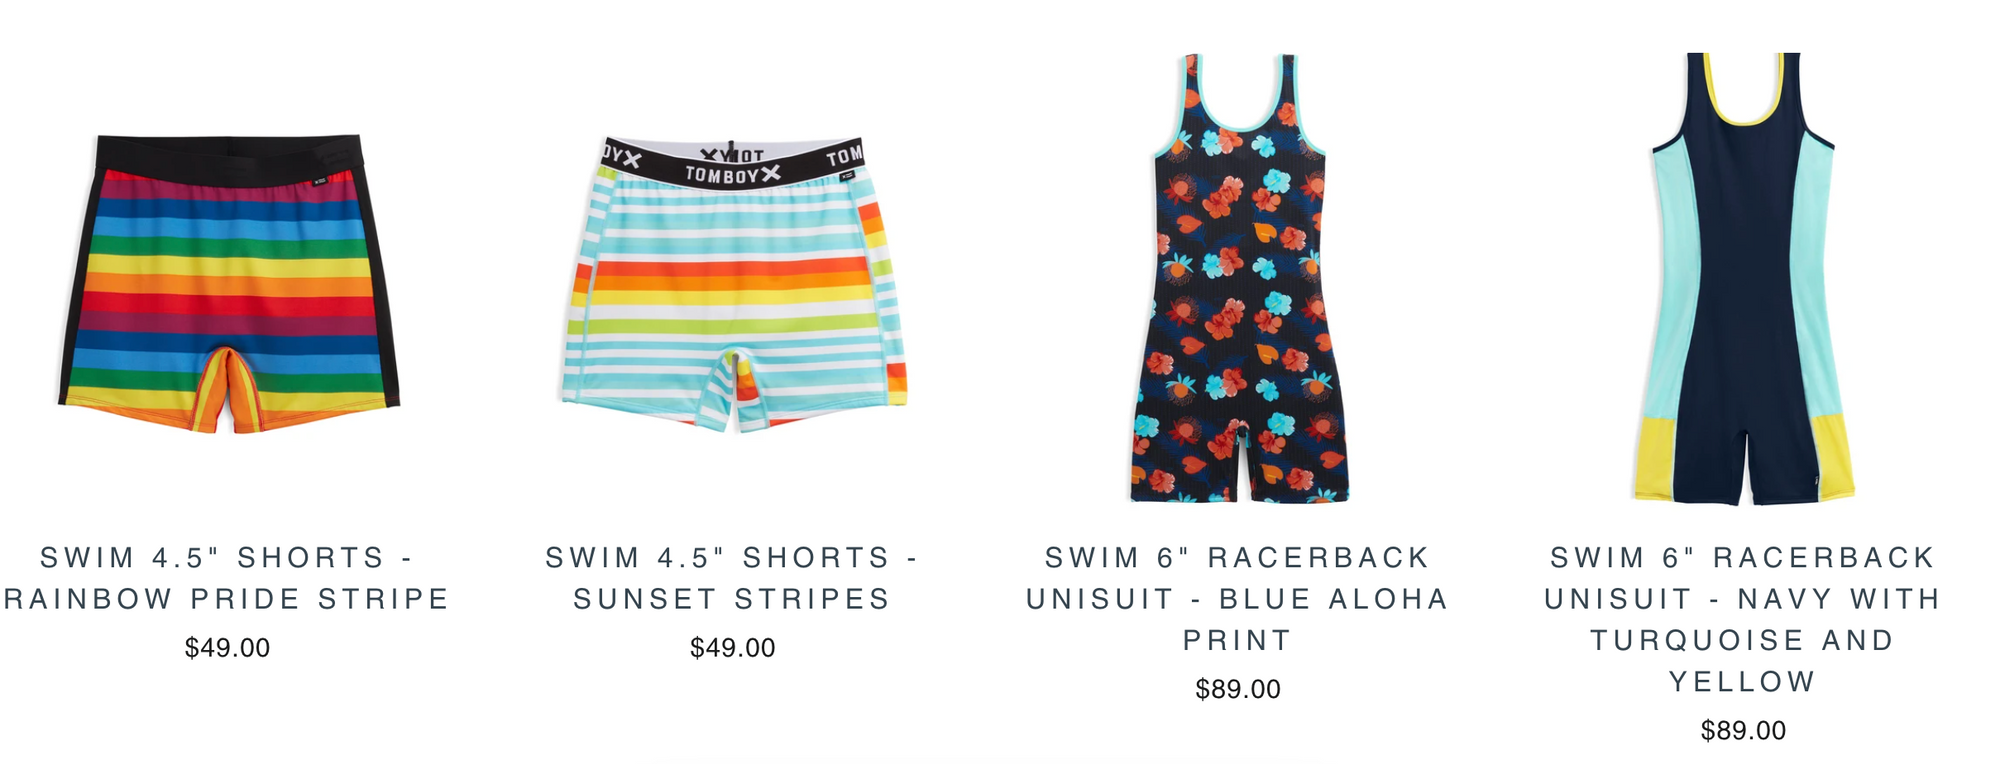 screenshot of the TomboyX website featuring 2 pairs of 4.5" swim shorts and 2 "unisuits," one-piece swimsuits that look like a tank top and shorts combined